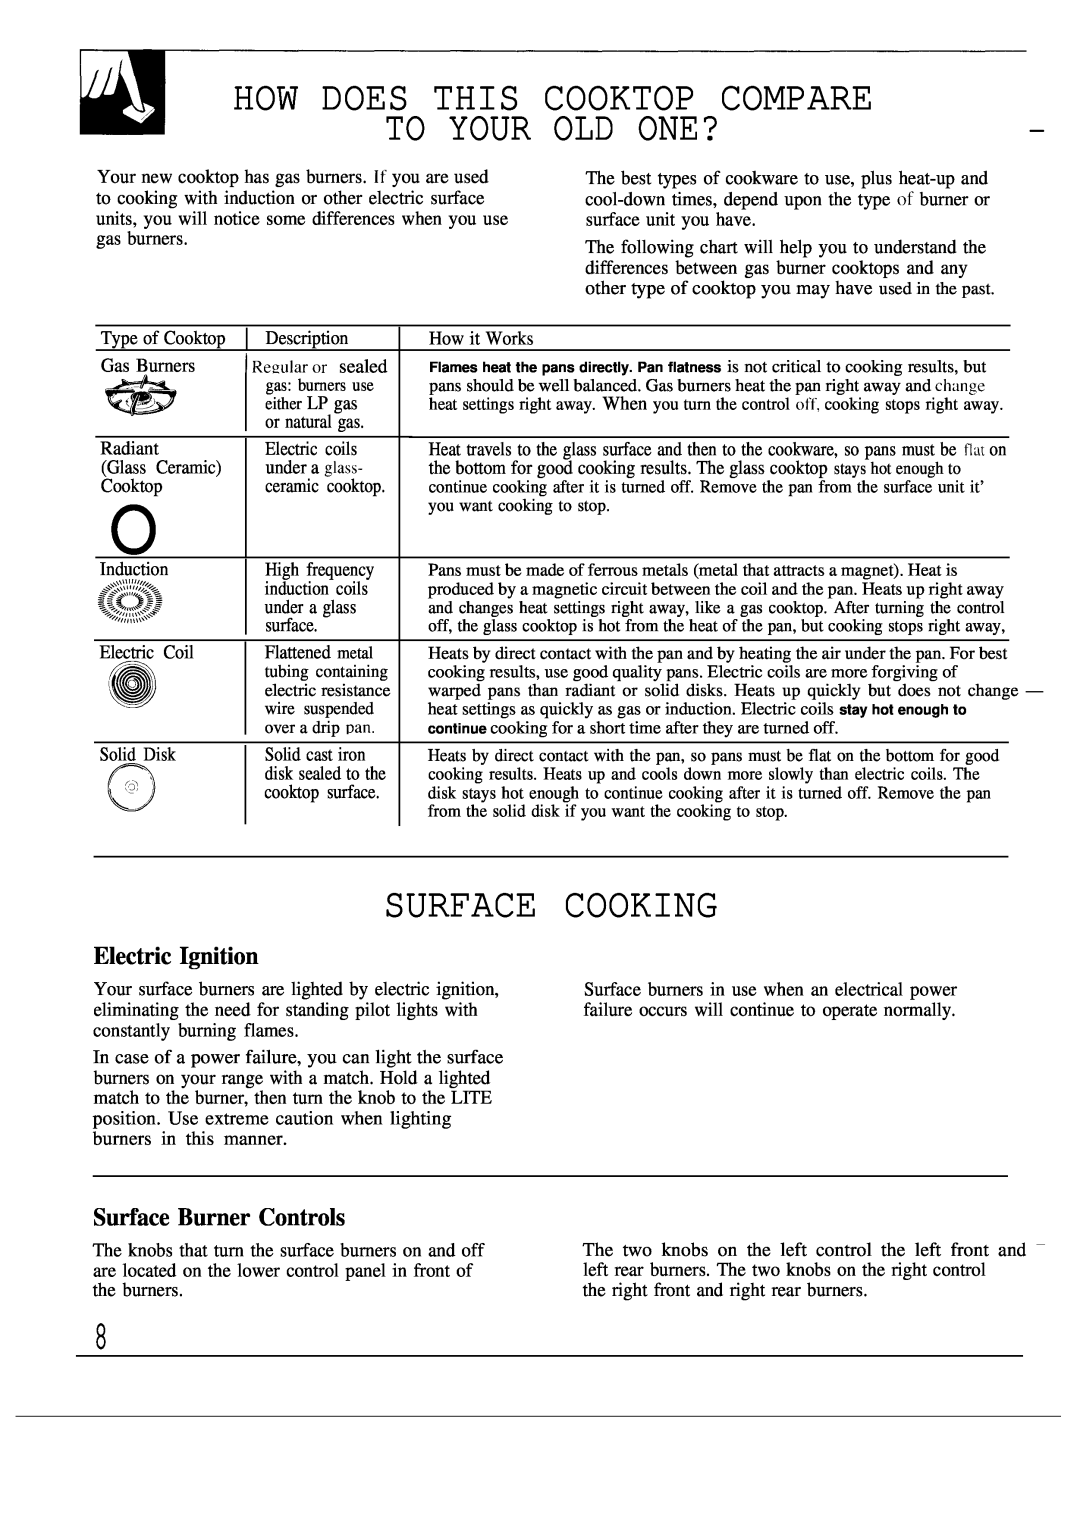 GE JGSC12 How Does This Cooktop Compare, Your, Old One?, Surface Cooking, Electric Ignition, Surface Burner Controls 